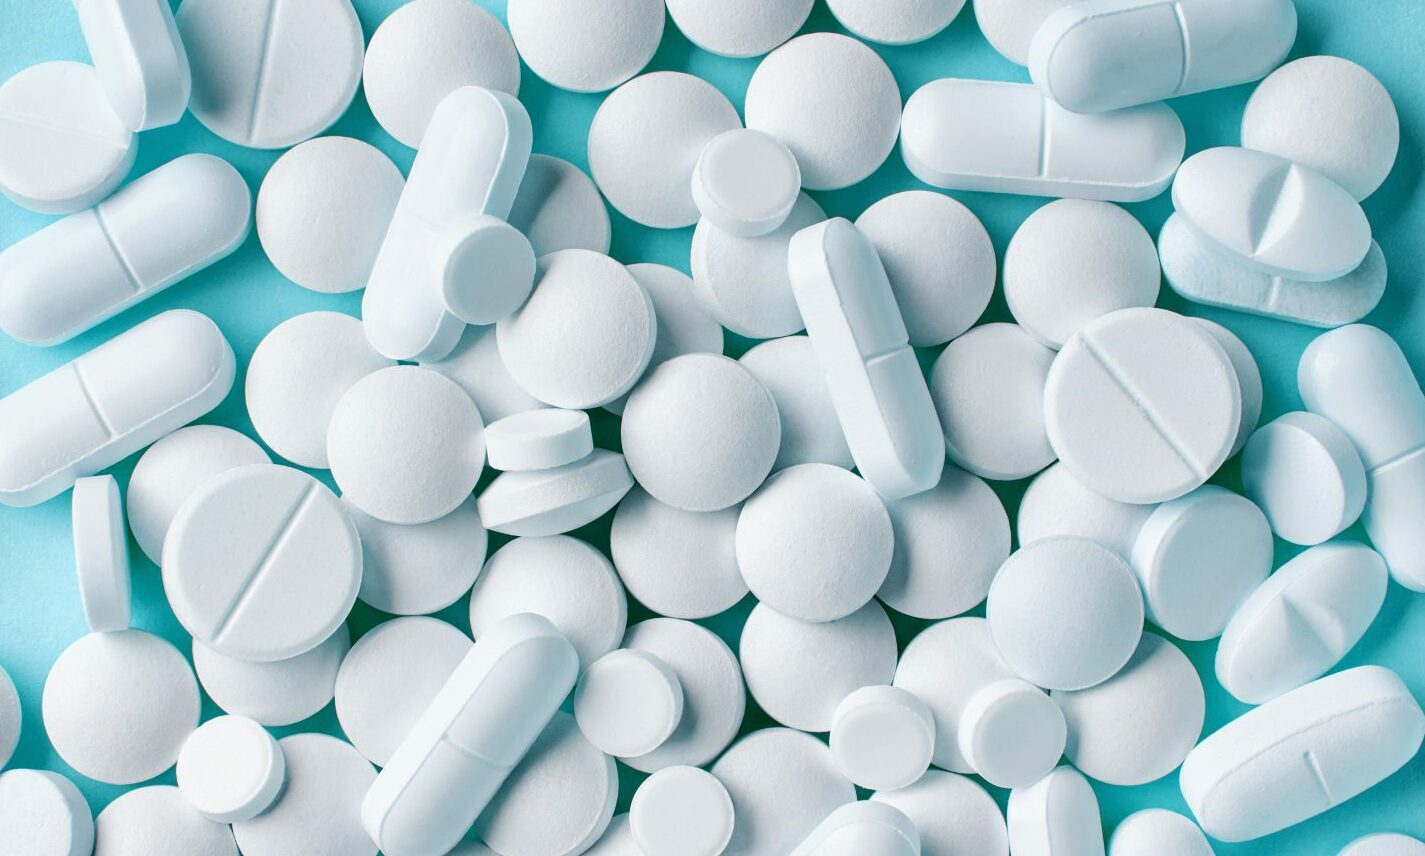 A pile of white tablets.